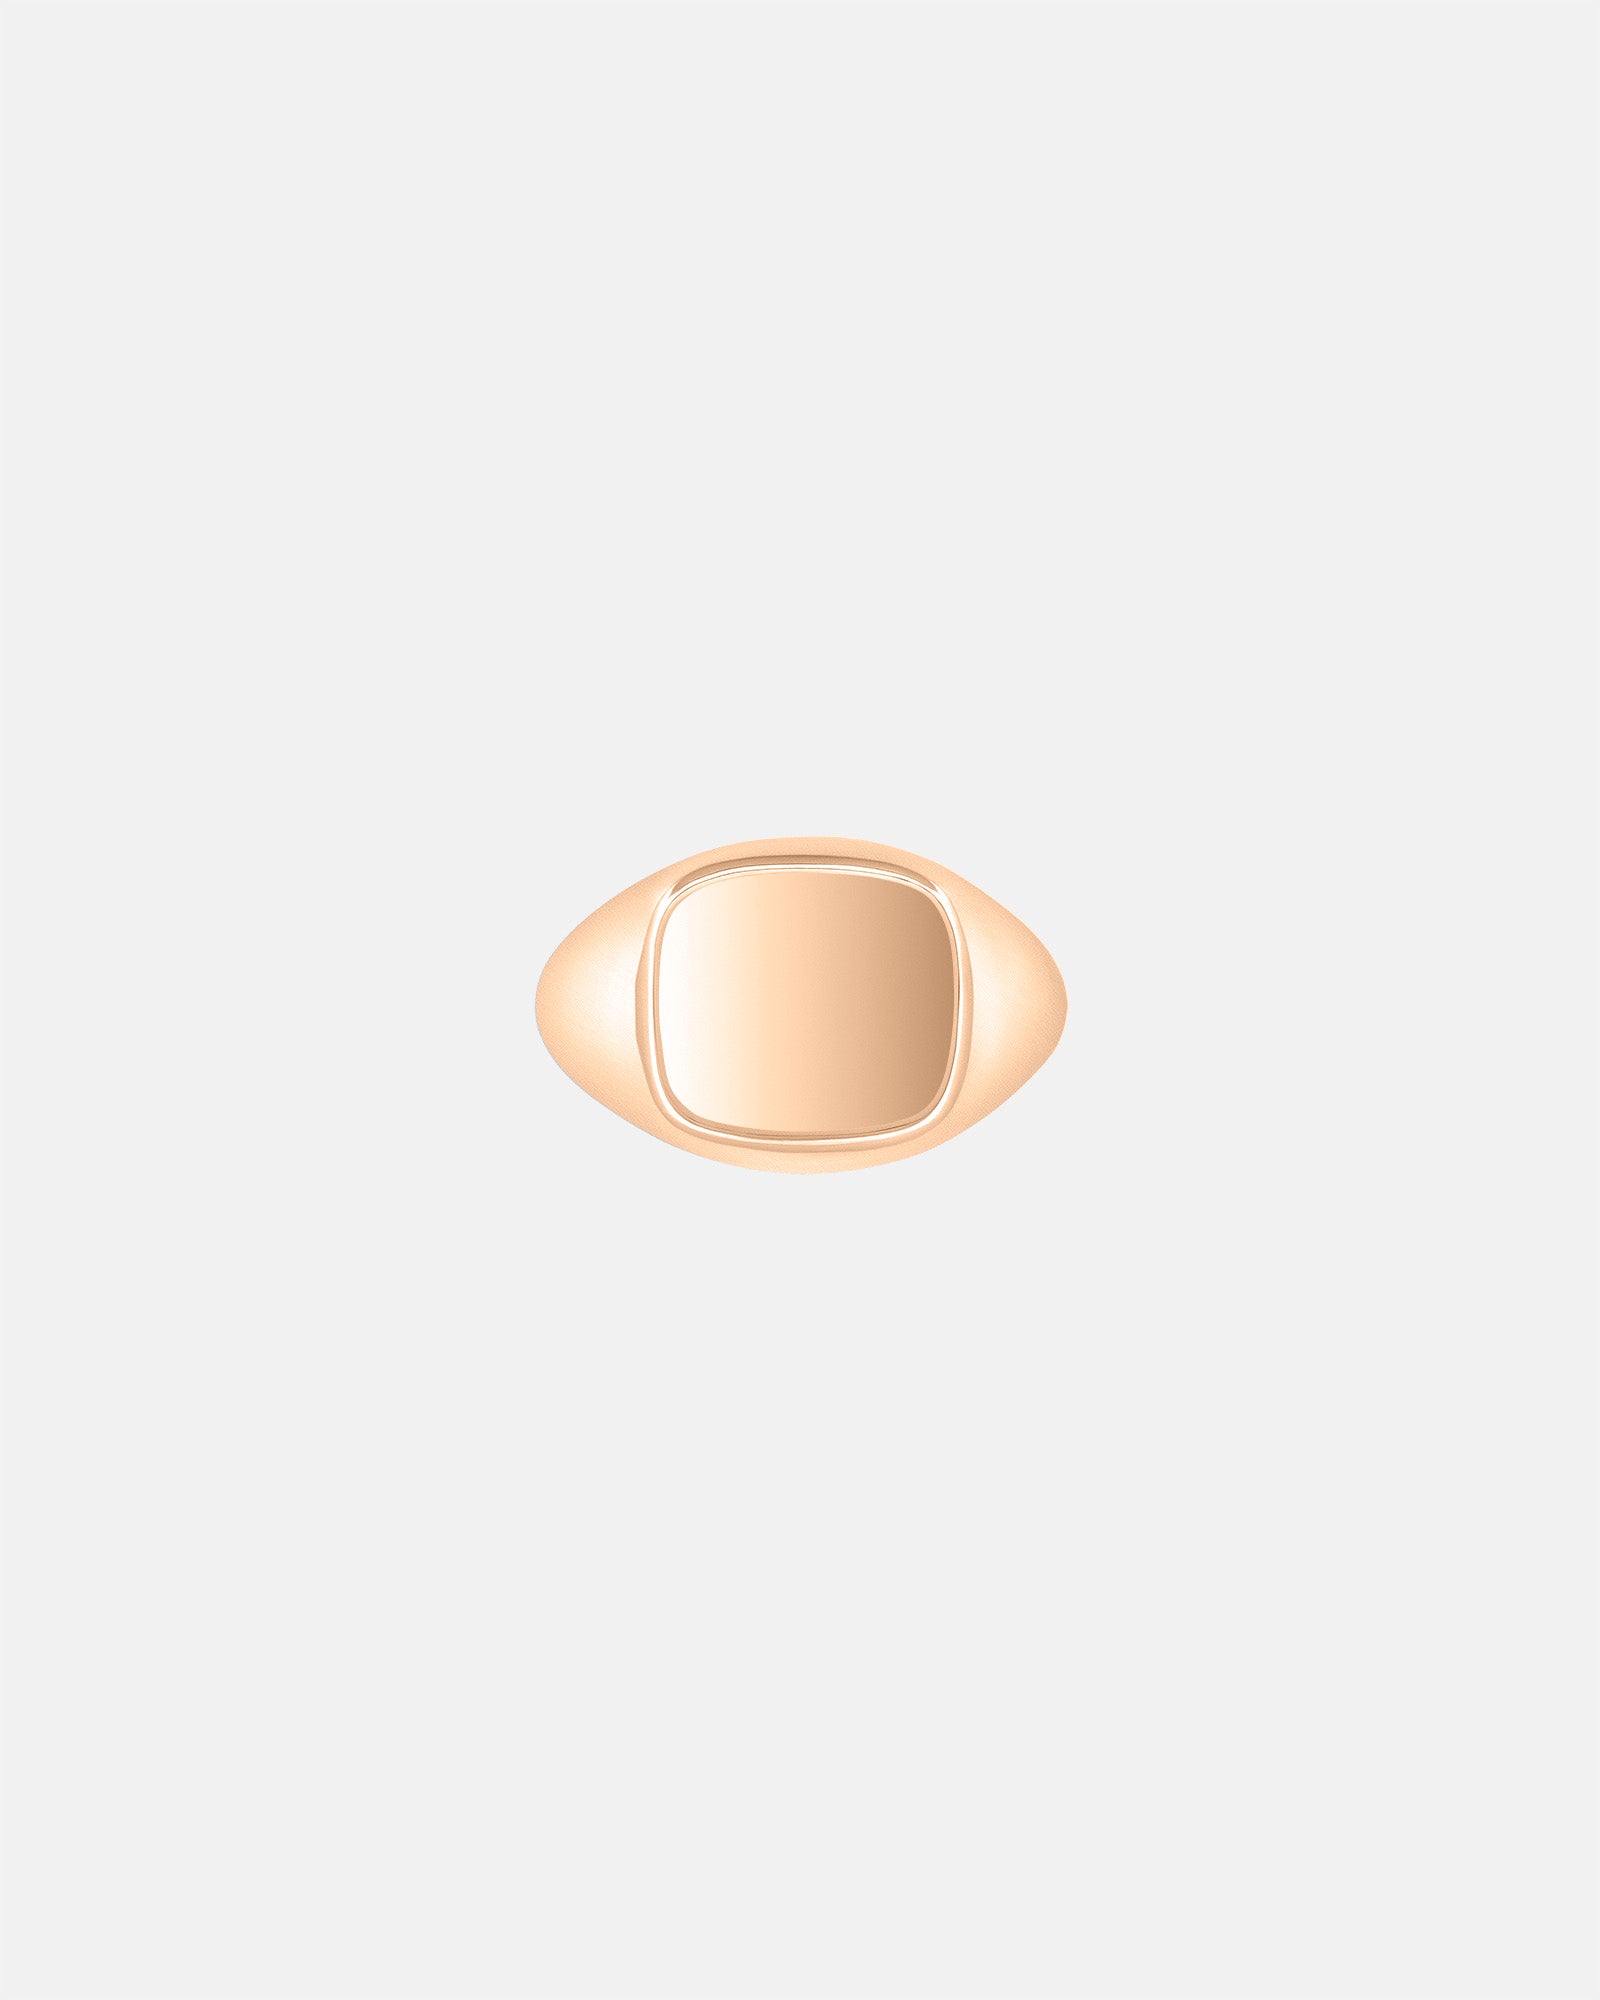 Minimal Square Signet Ring in 9k Rose Gold by Wilson Grant